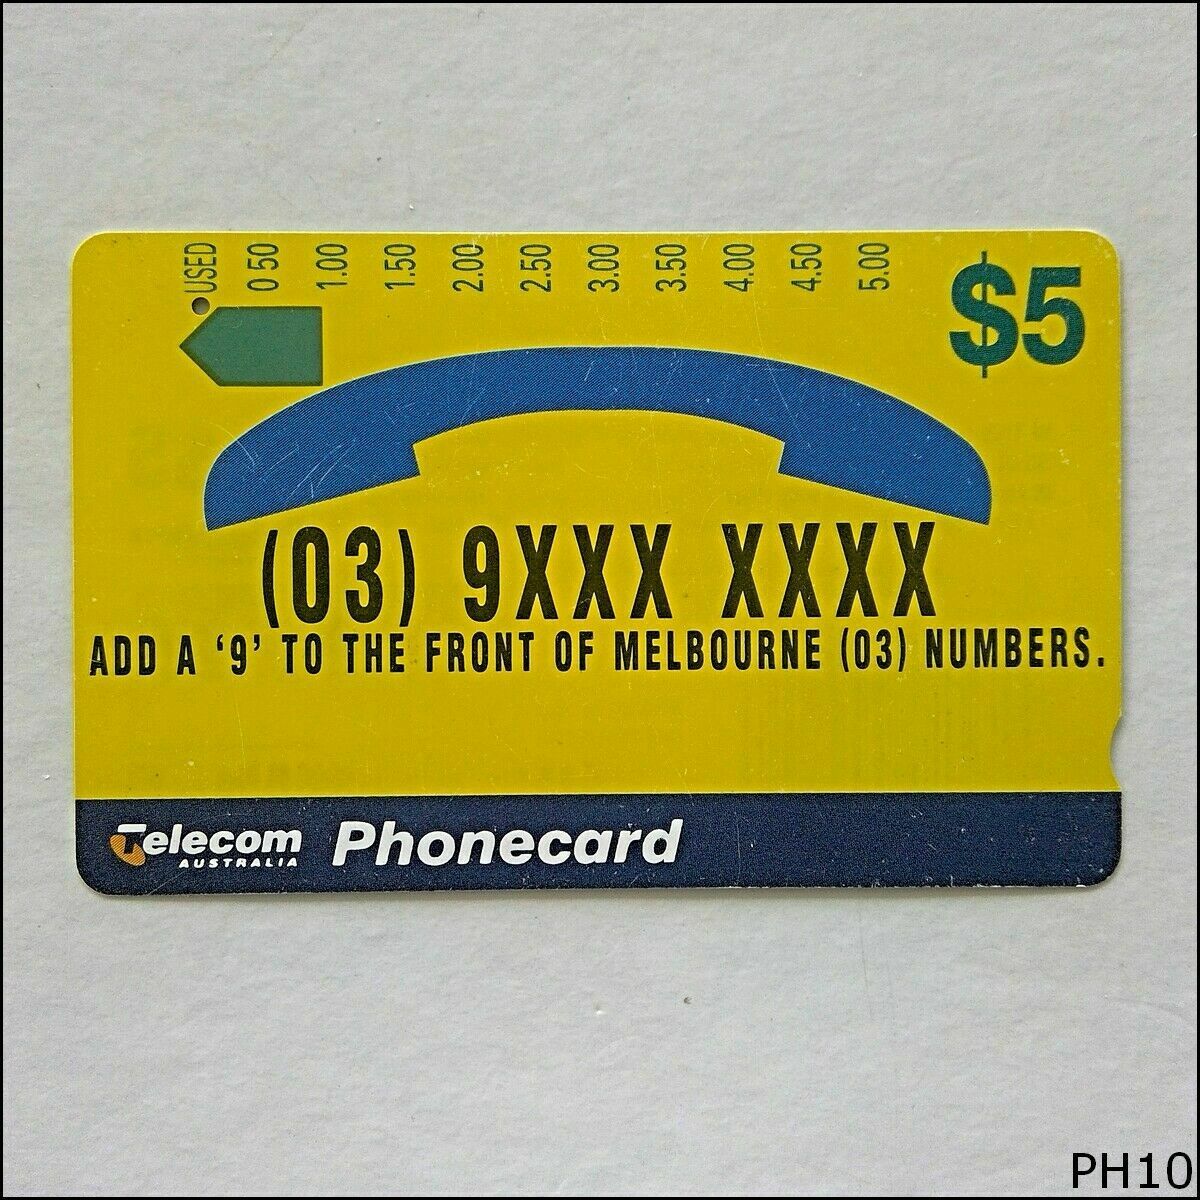 Telecom Telephone Number Changes Melbourne A952512 840 $5 Phonecard (PH10)